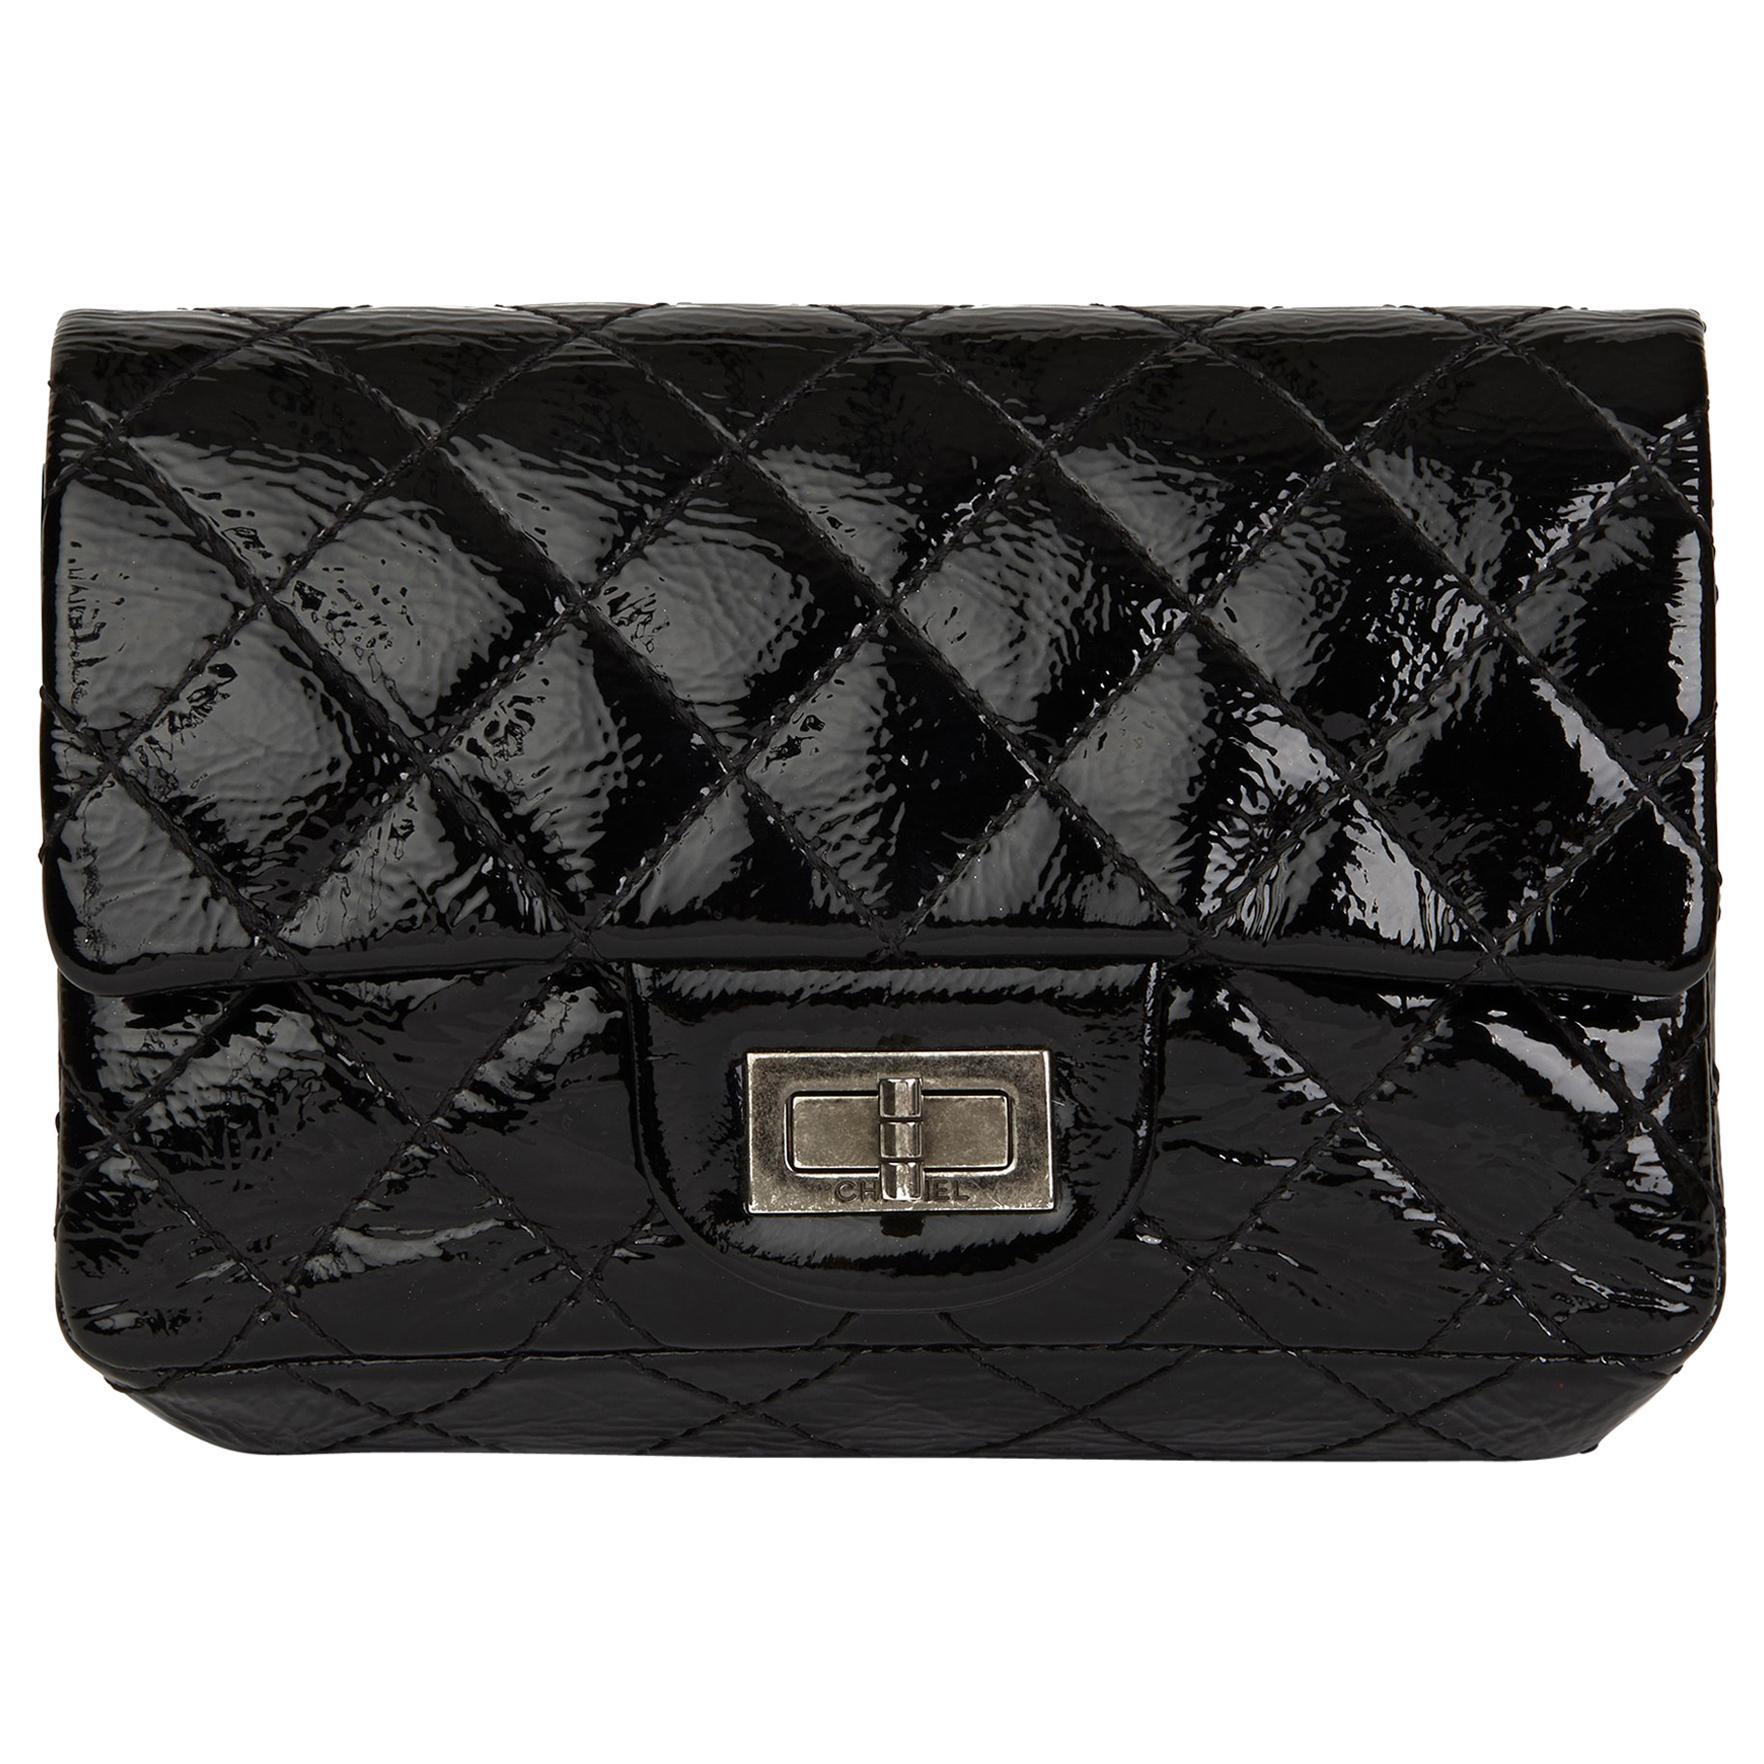 2007 Chanel Black Quilted Aged Patent Leather 2.55 Reissue Clutch